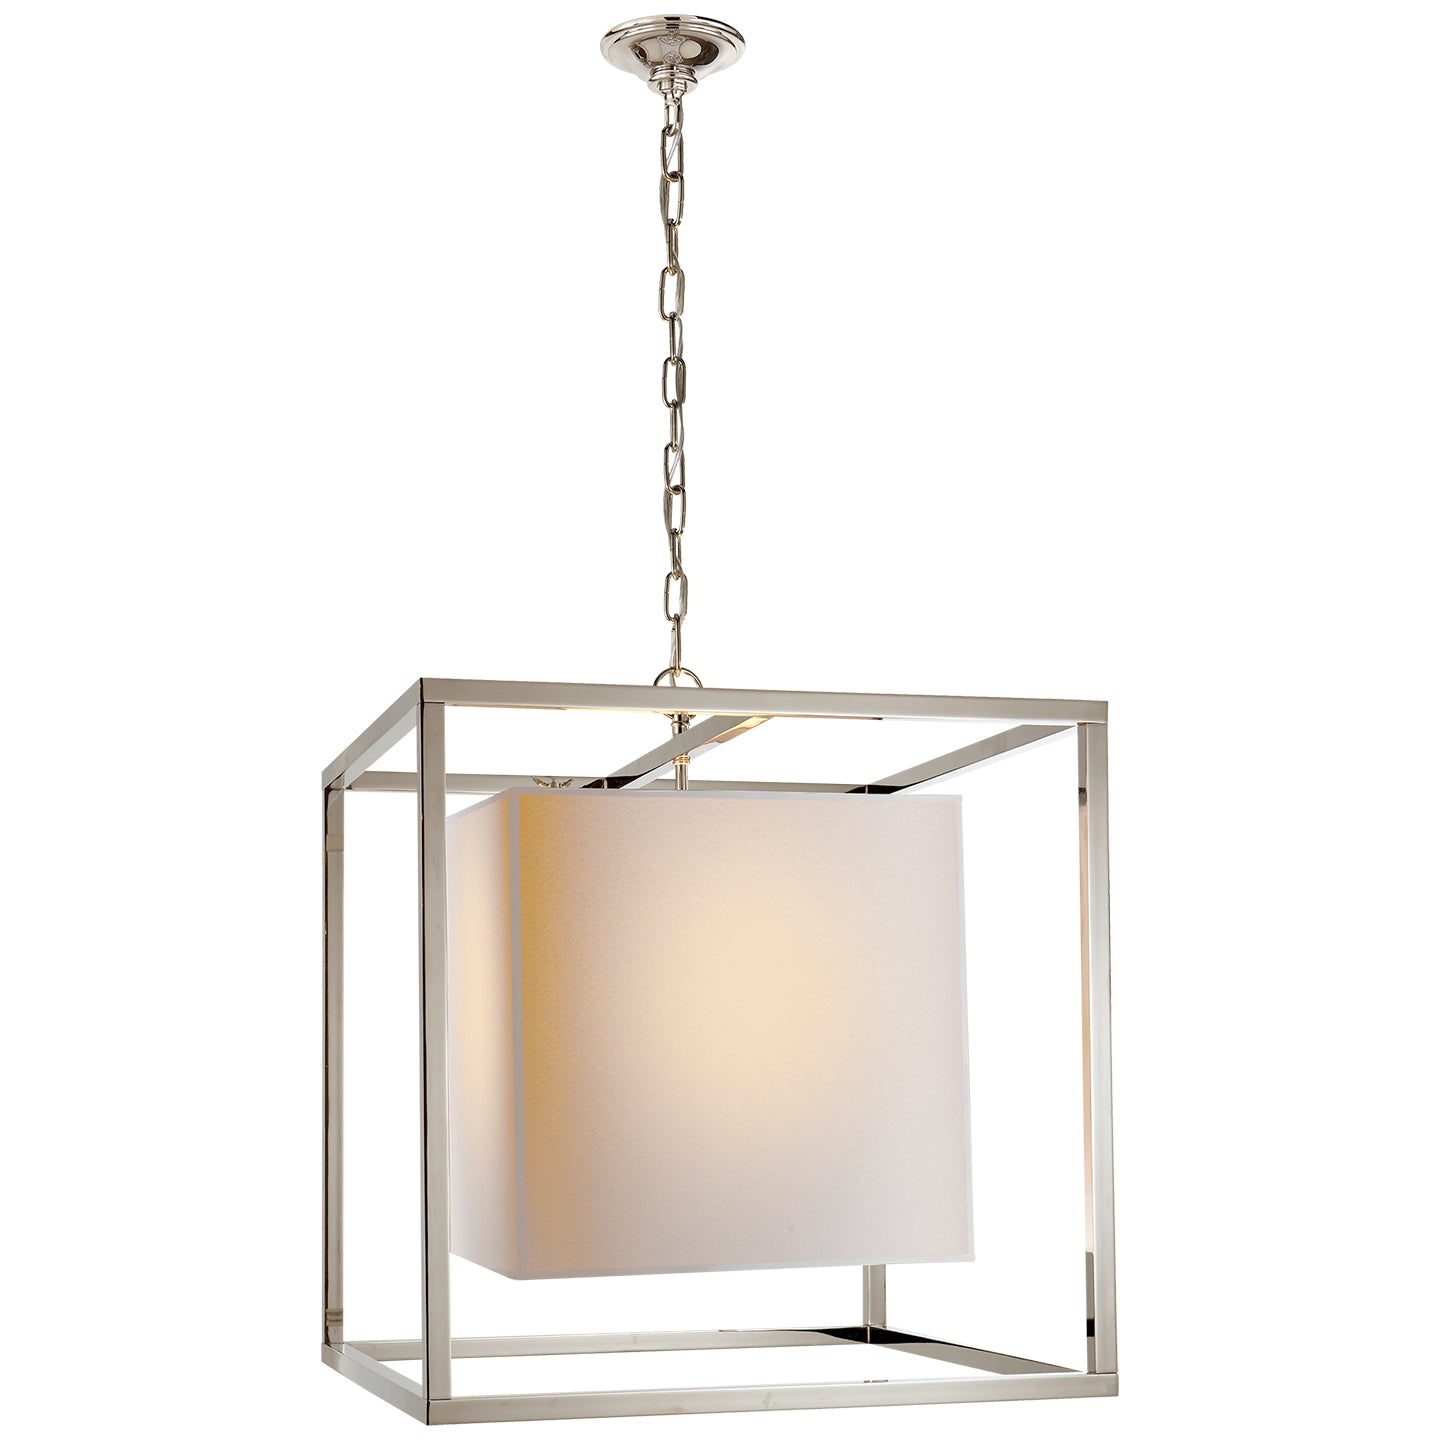 Load image into Gallery viewer, Visual Comfort Signature - SC 5160PN - Two Light Lantern - CAGED - Polished Nickel
